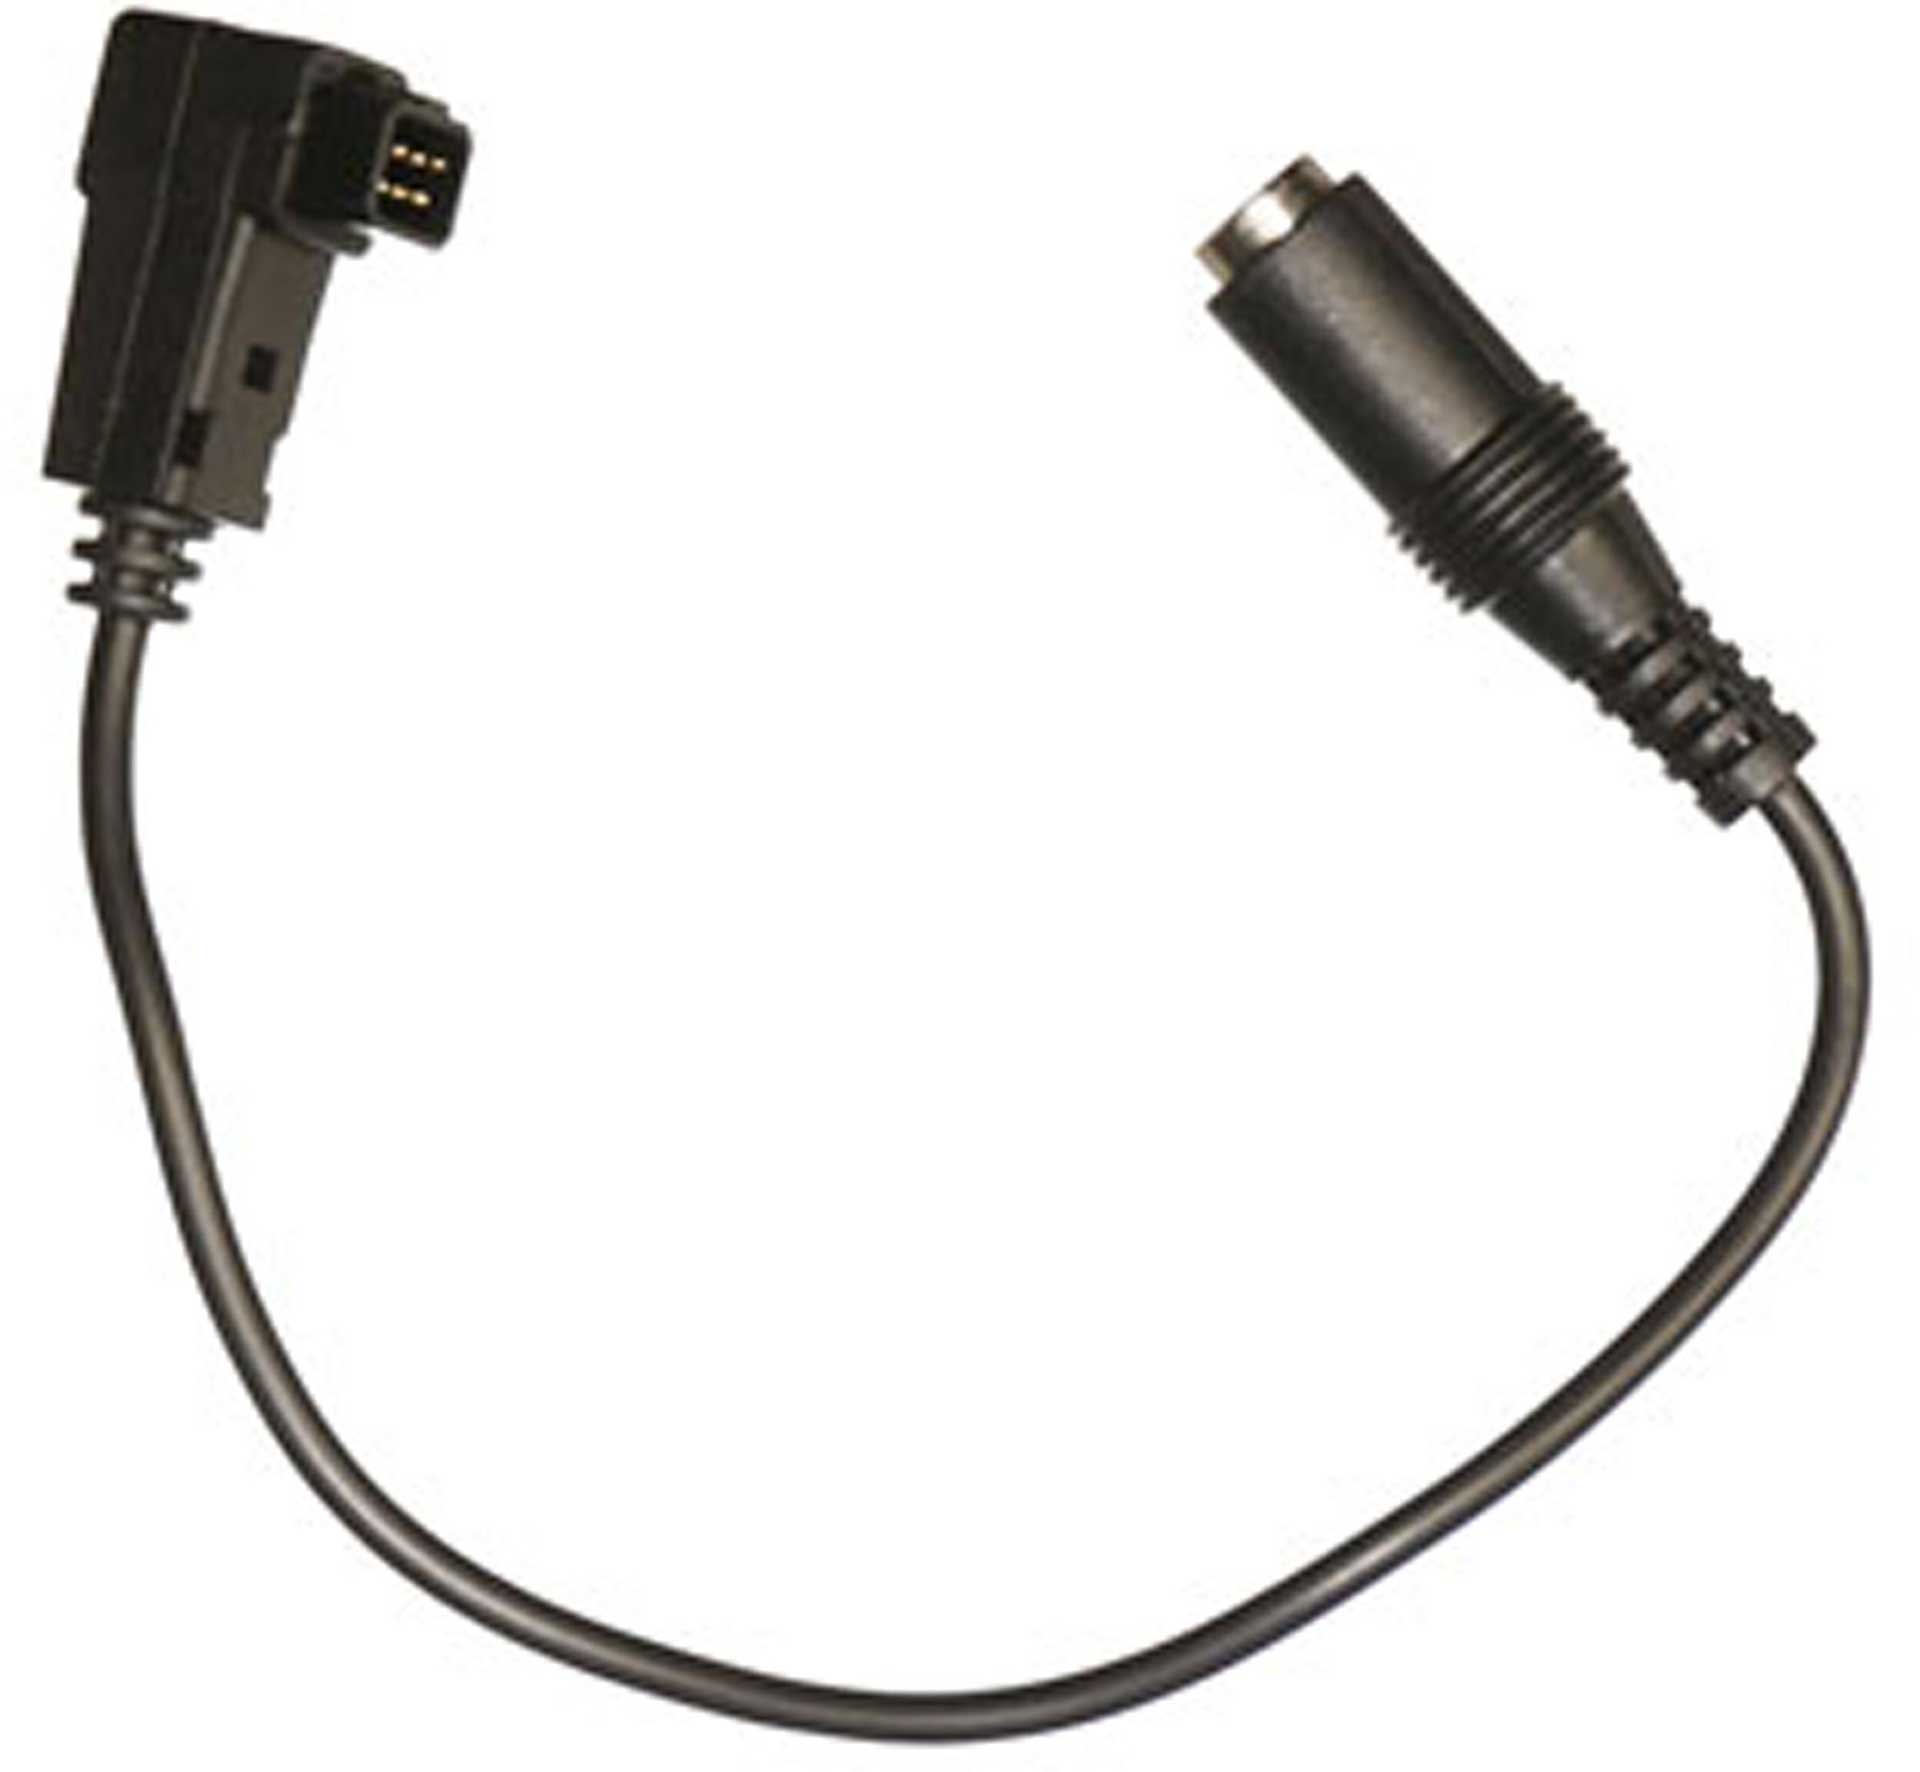 RCWARE Adaptercable 3.5mm jack to Futaba